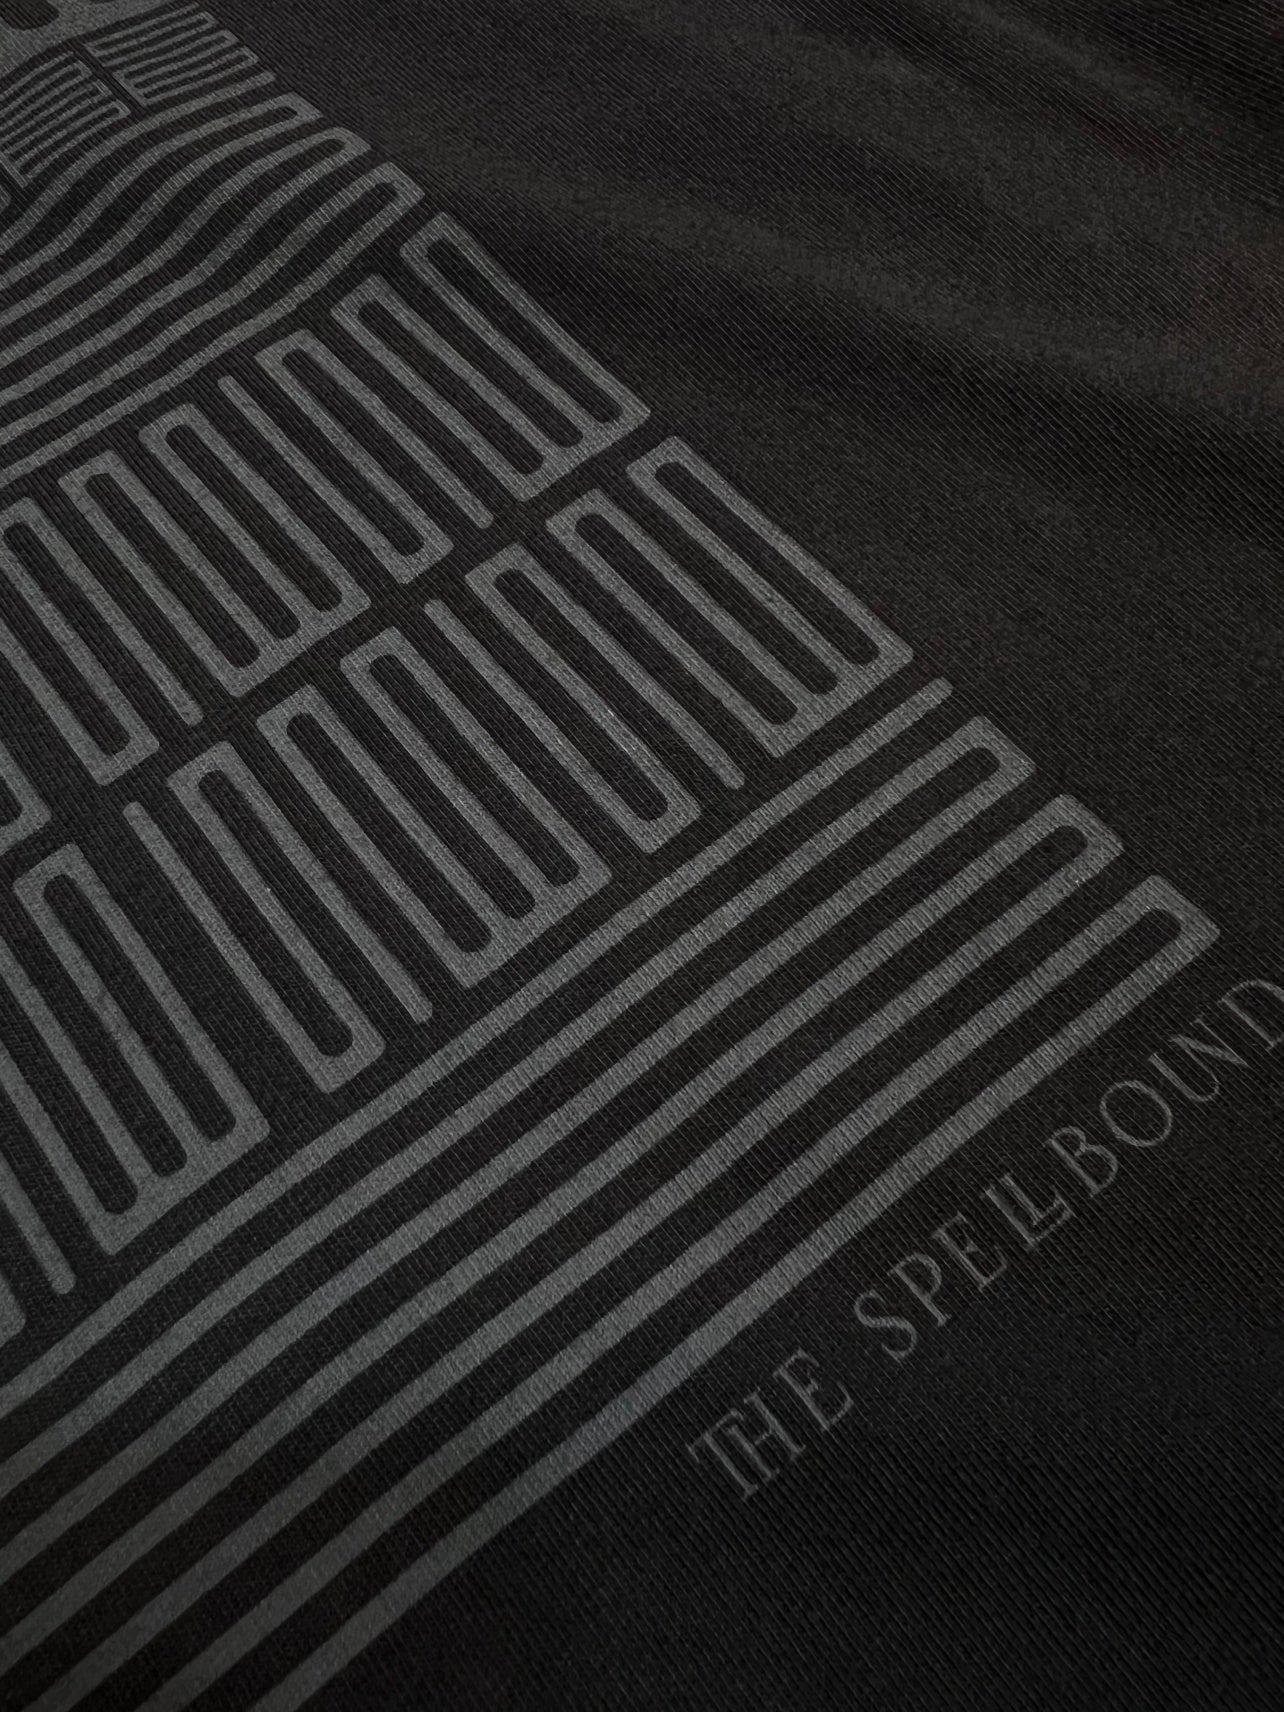 THE SPELLBOUND TOUR 2022 T-SHIRTS